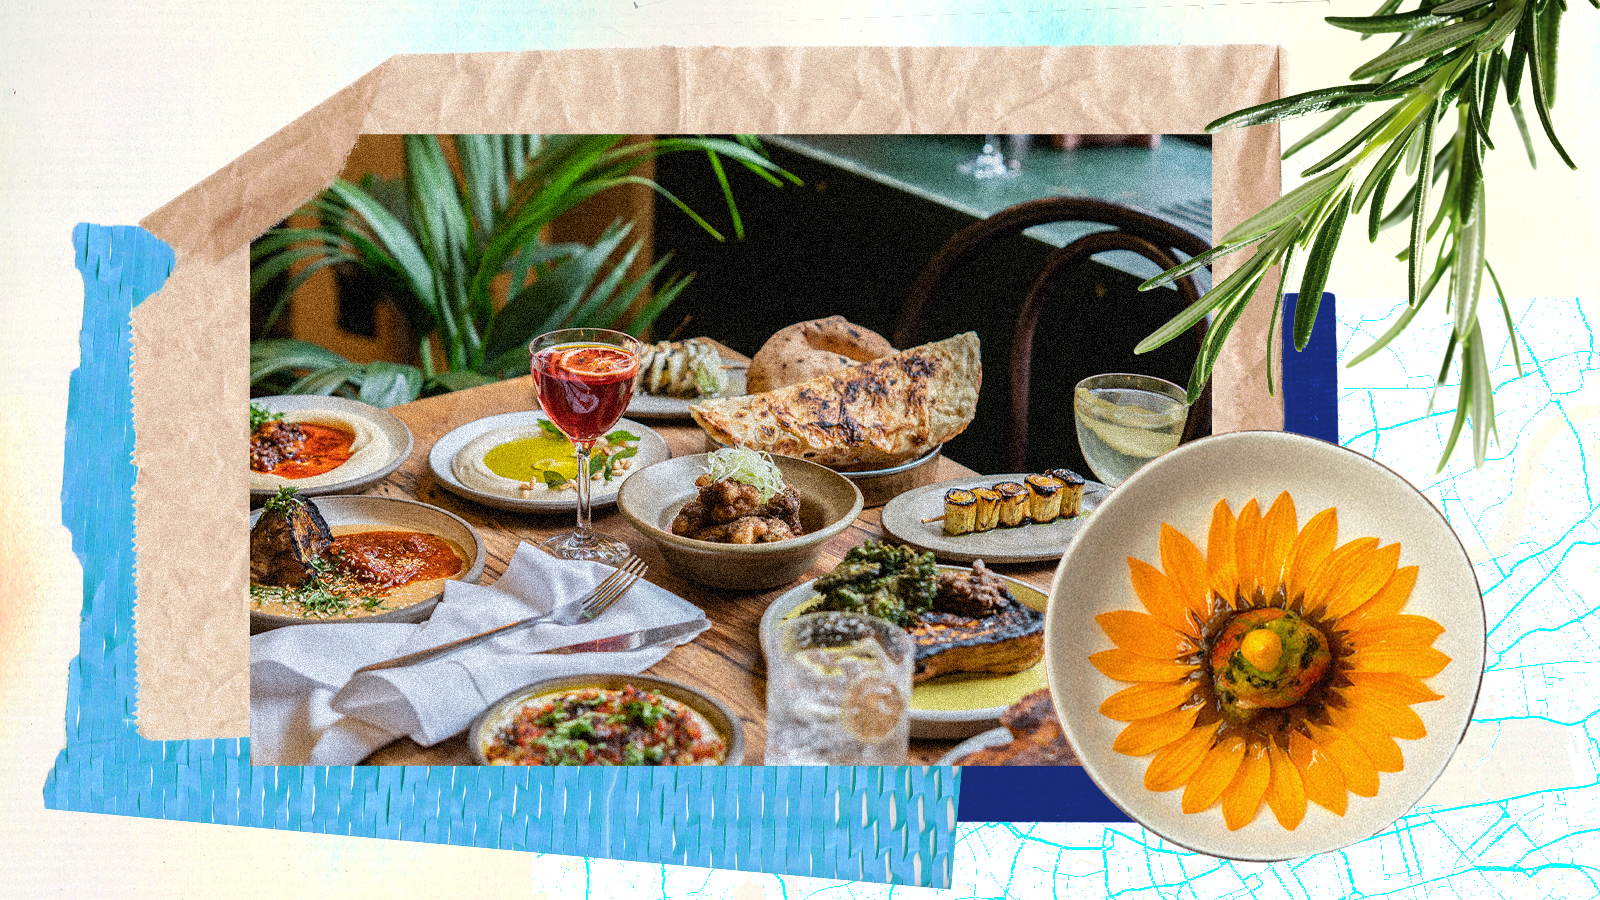 A photo collage showing an image of a table spread with various dishes, overlaid with a photo of food in the shape of a sunflower.